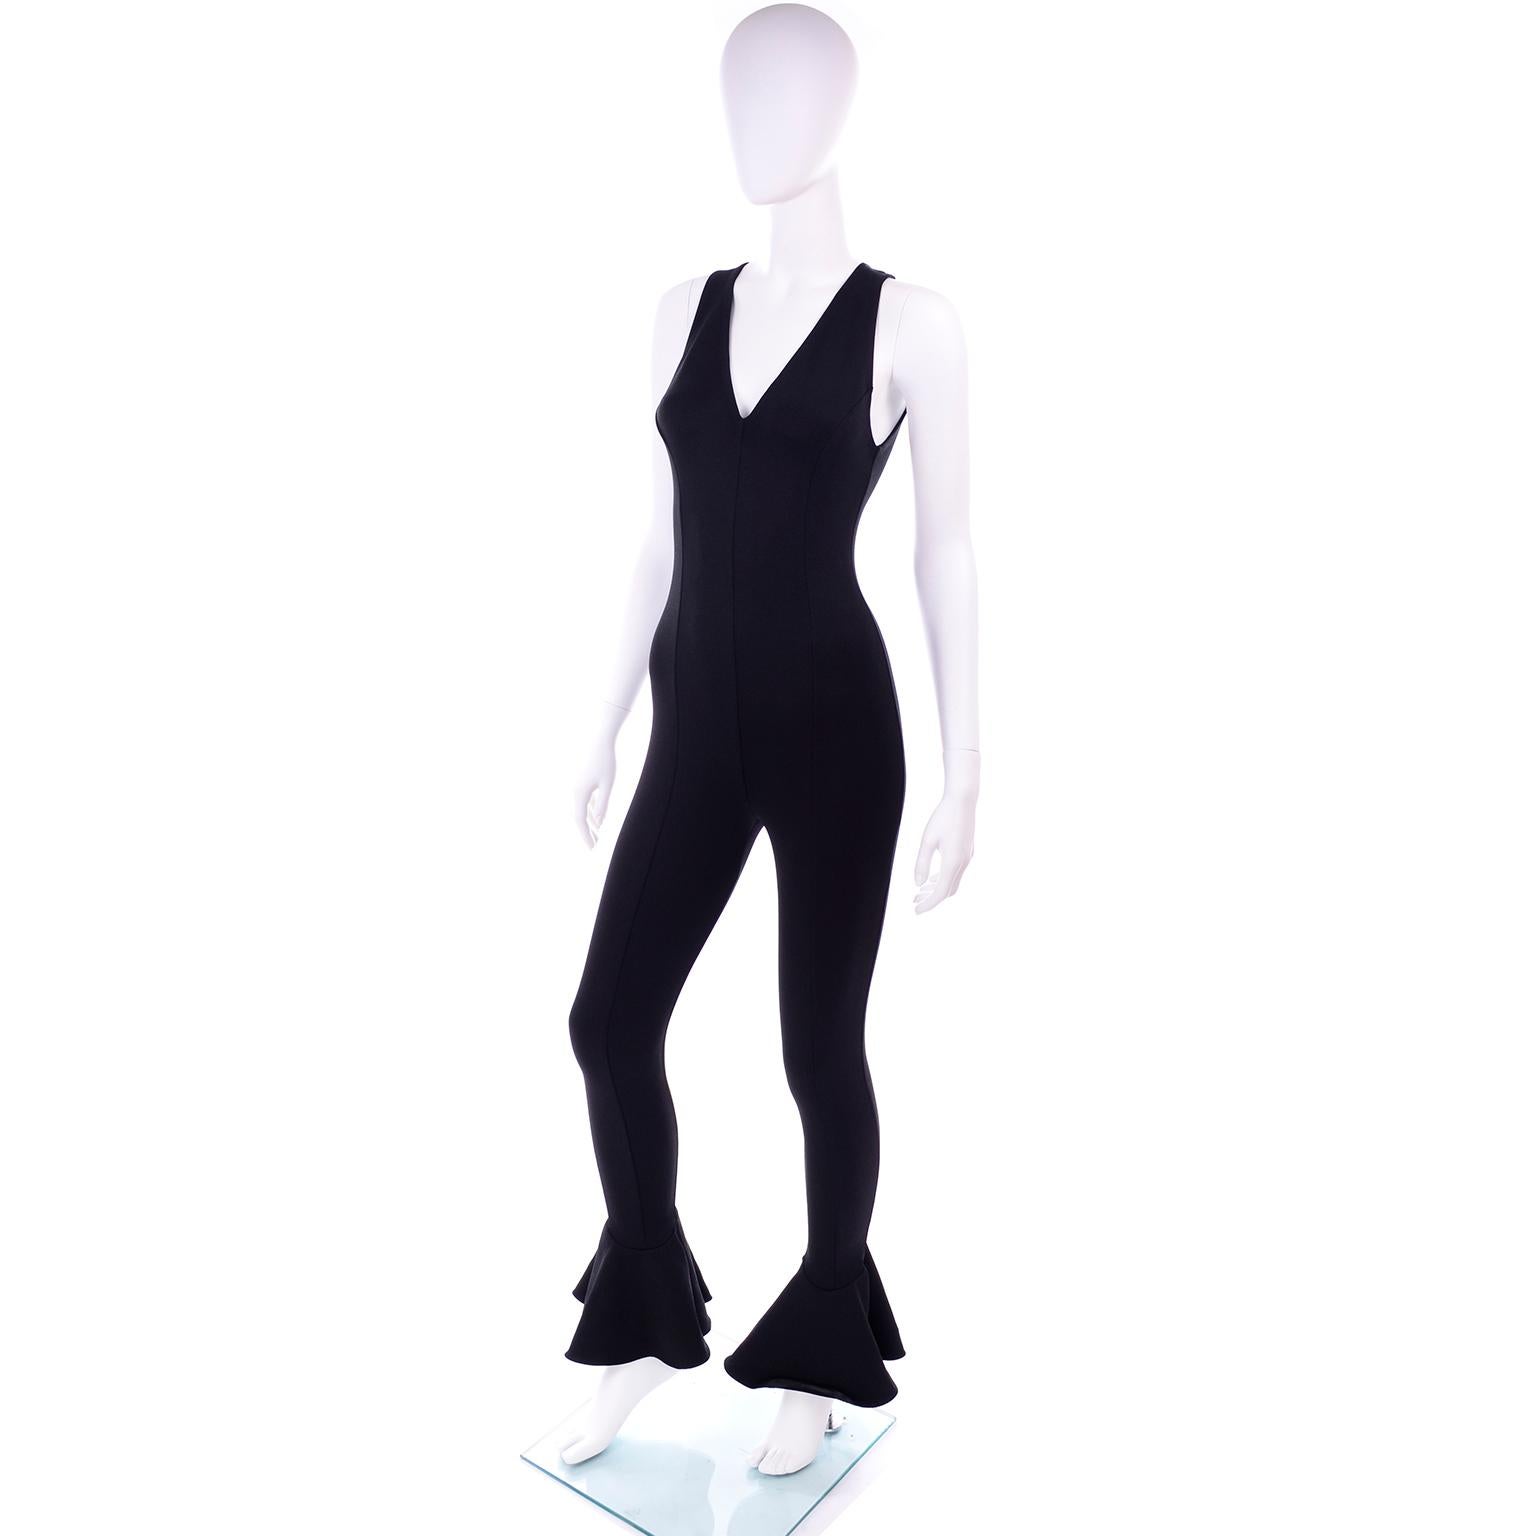 Documented 1993 Gianni Versace Couture Vintage Black Runway Ruffled Hem Jumpsuit For Sale 2